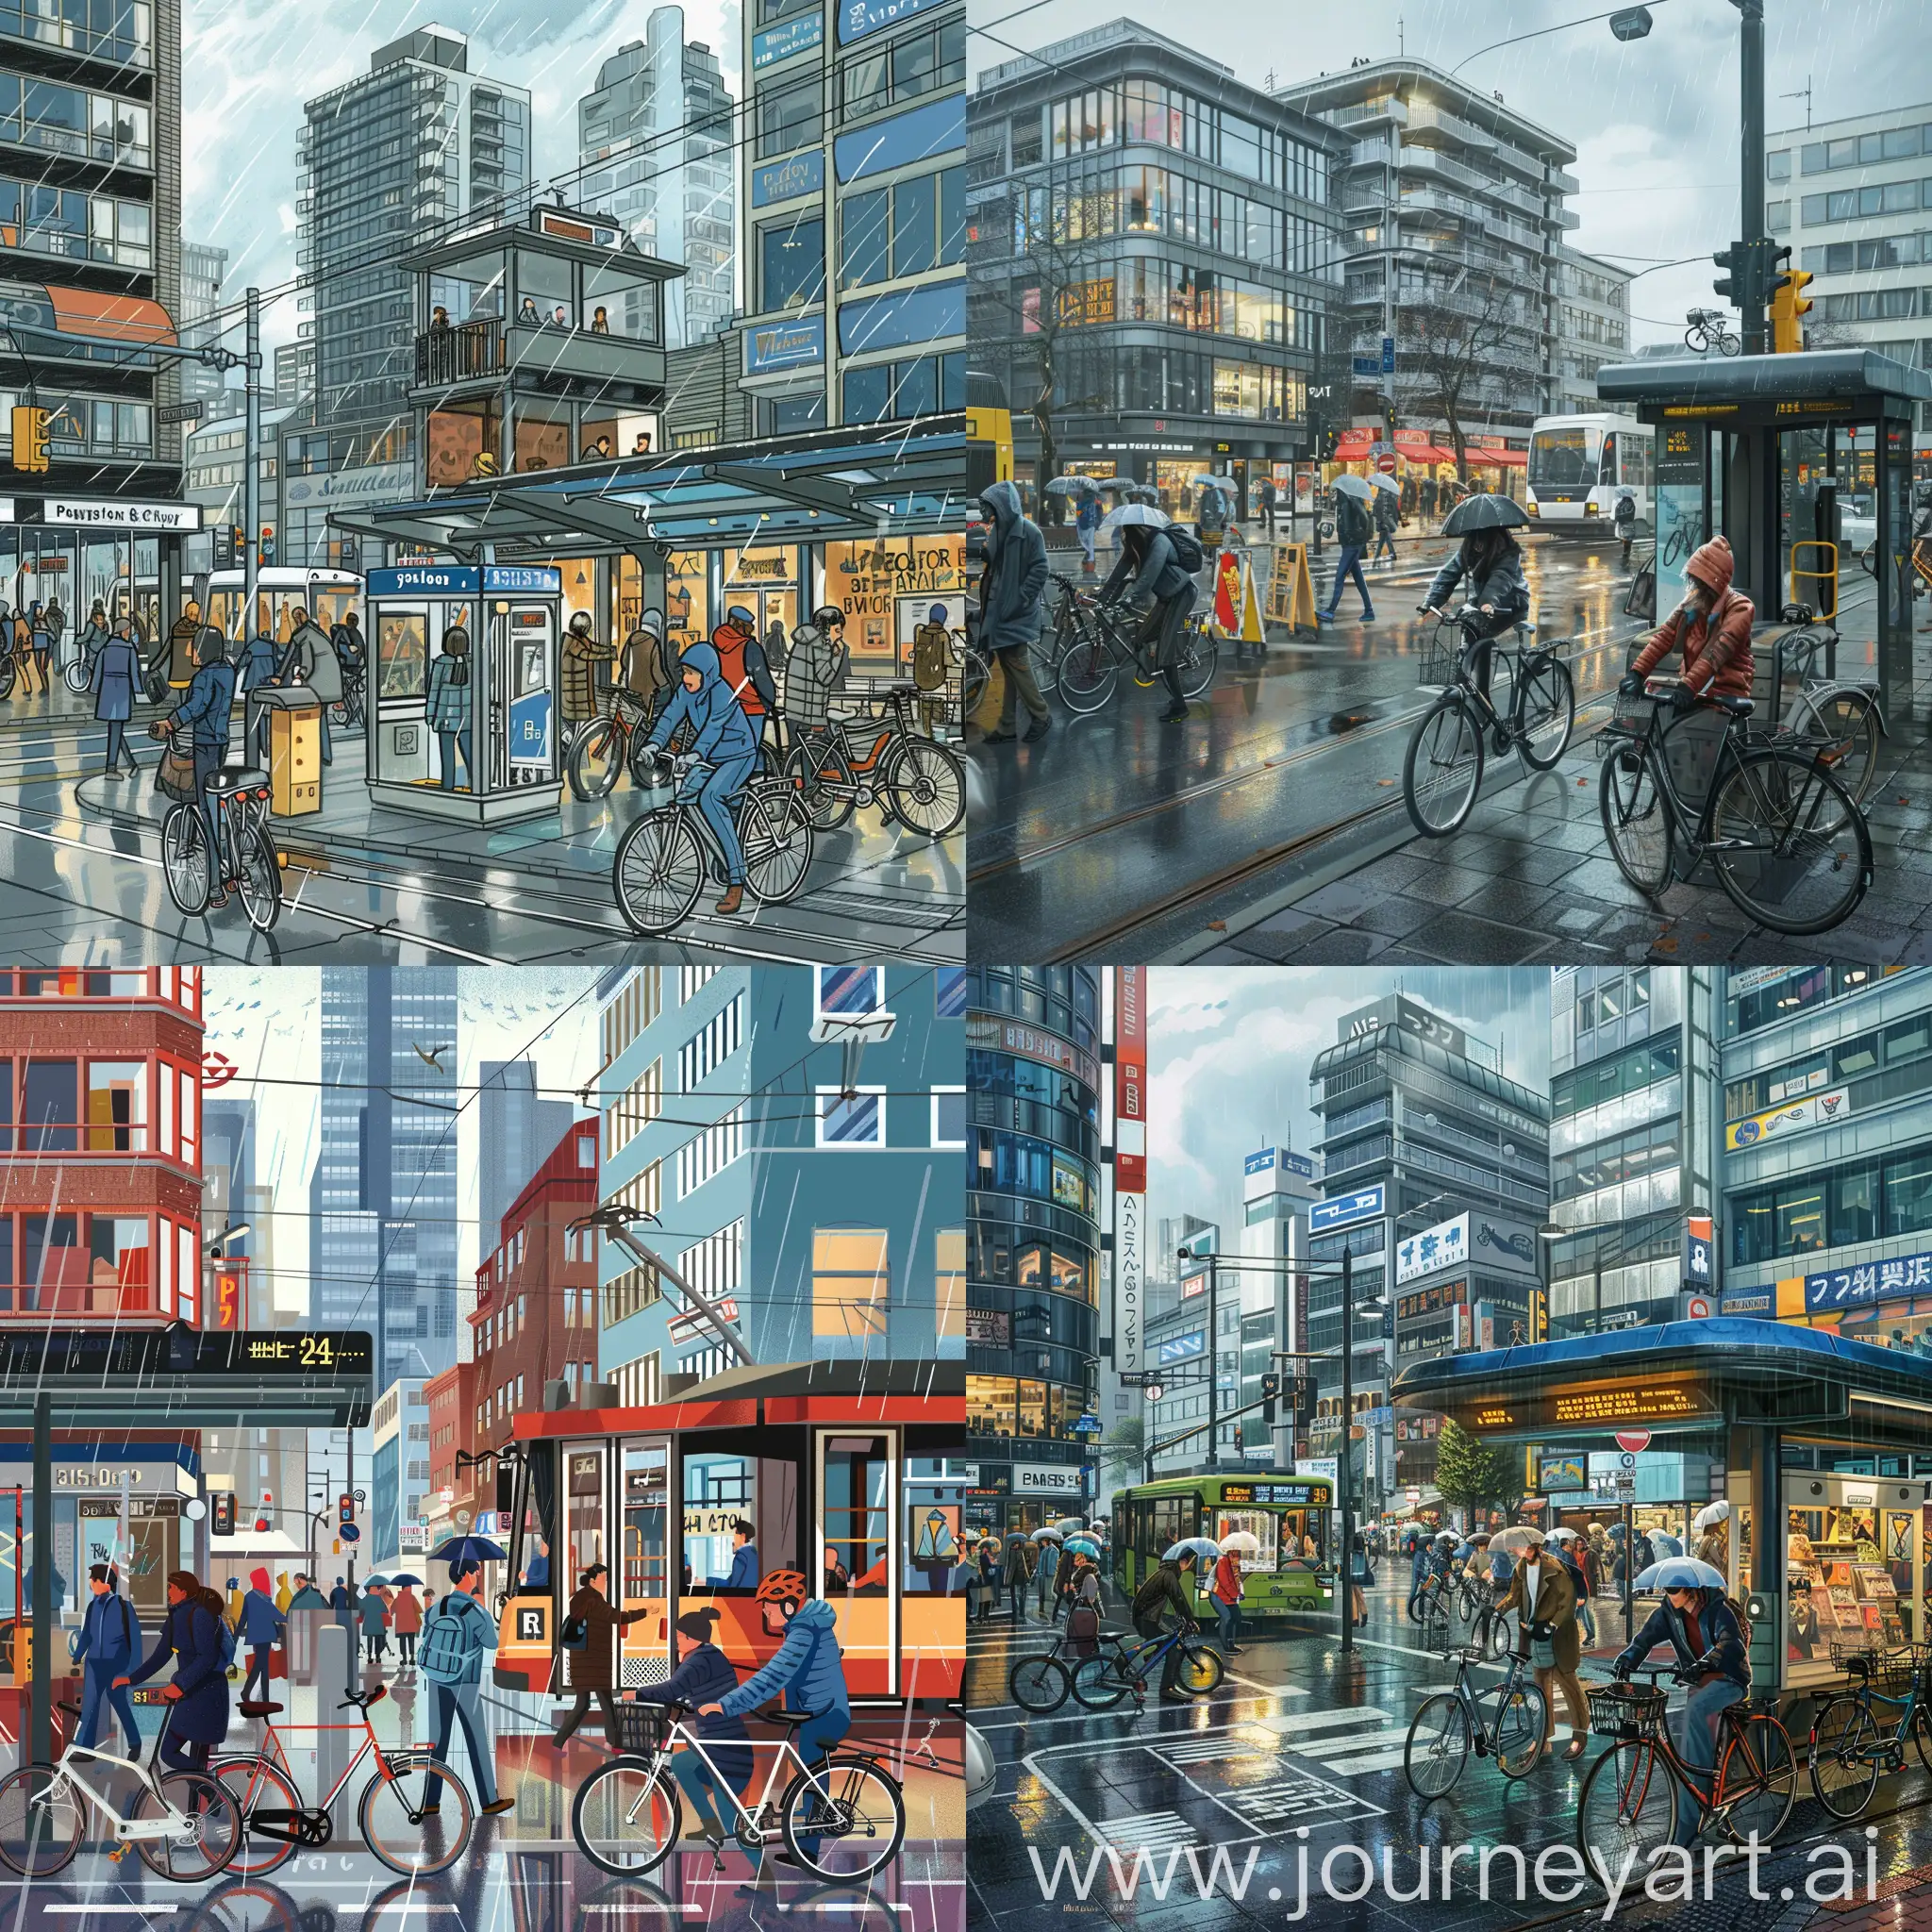 Create an urban scene in a large city. The scene includes tall buildings, shops, busy intersections, a bus stop, people rushing to work or school, someone riding a bicycle, a bike rental station, rain falling, people wearing jackets, bicycles parked, and a tram